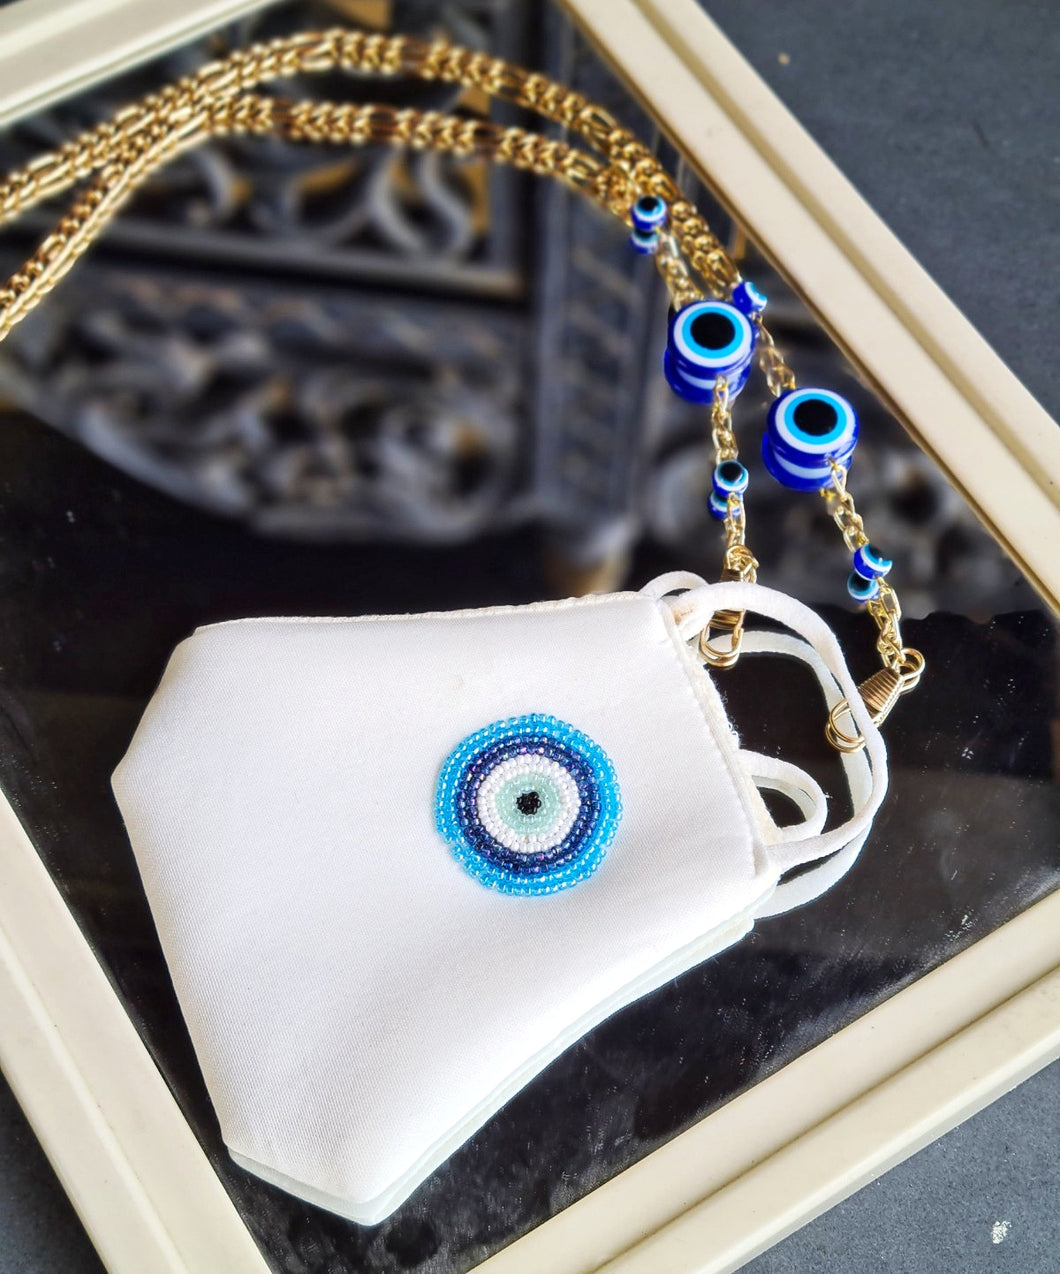 Evil eye white mask with mask chain